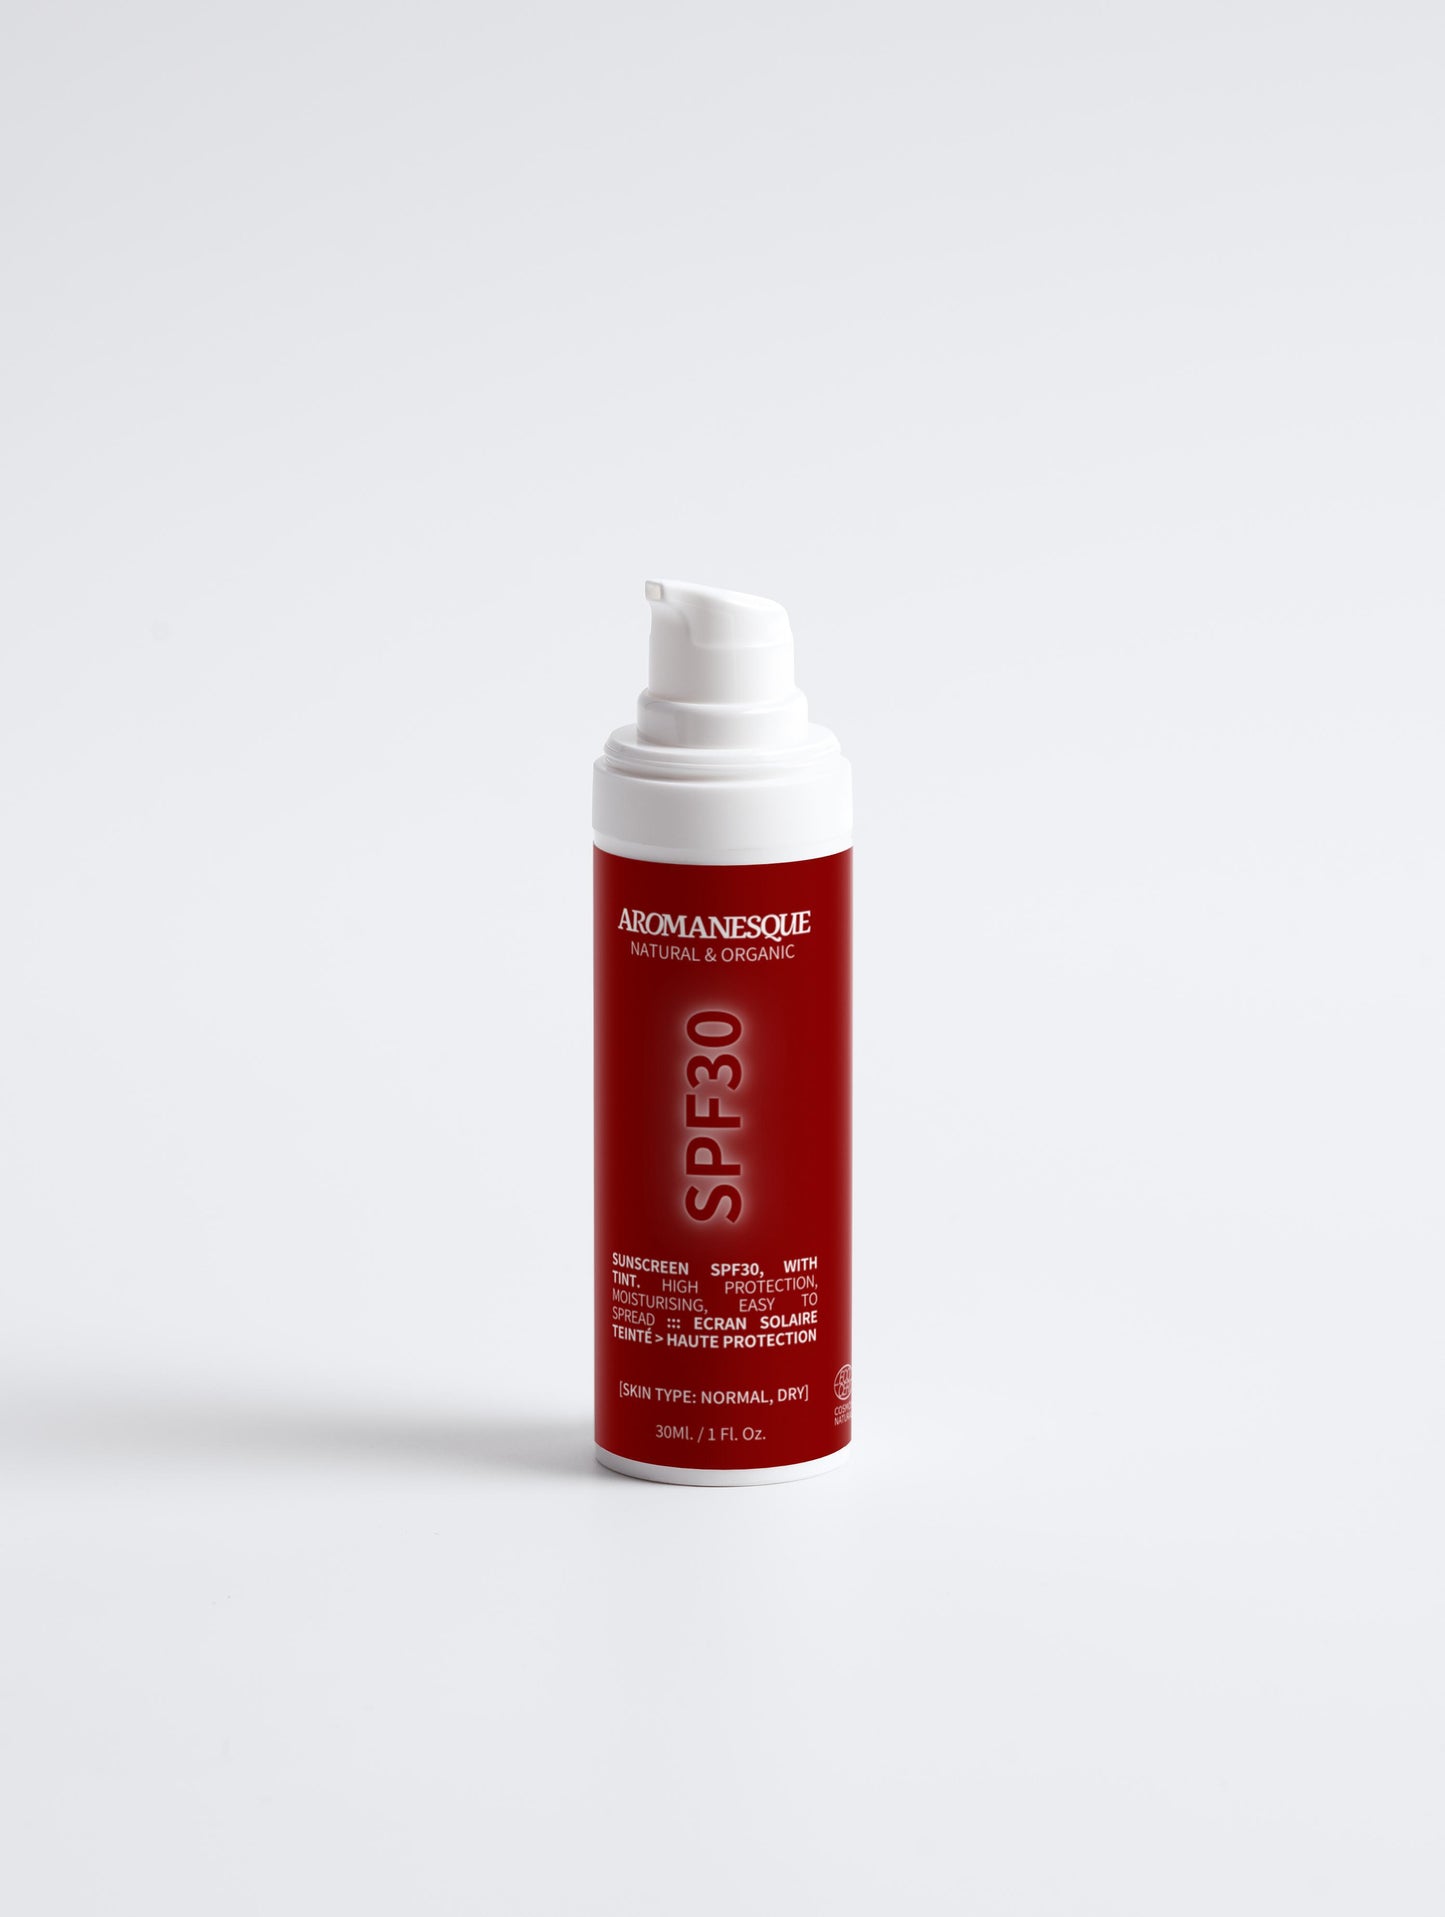 Aromanesque Sunscreen SPF30, with tint - 30Ml